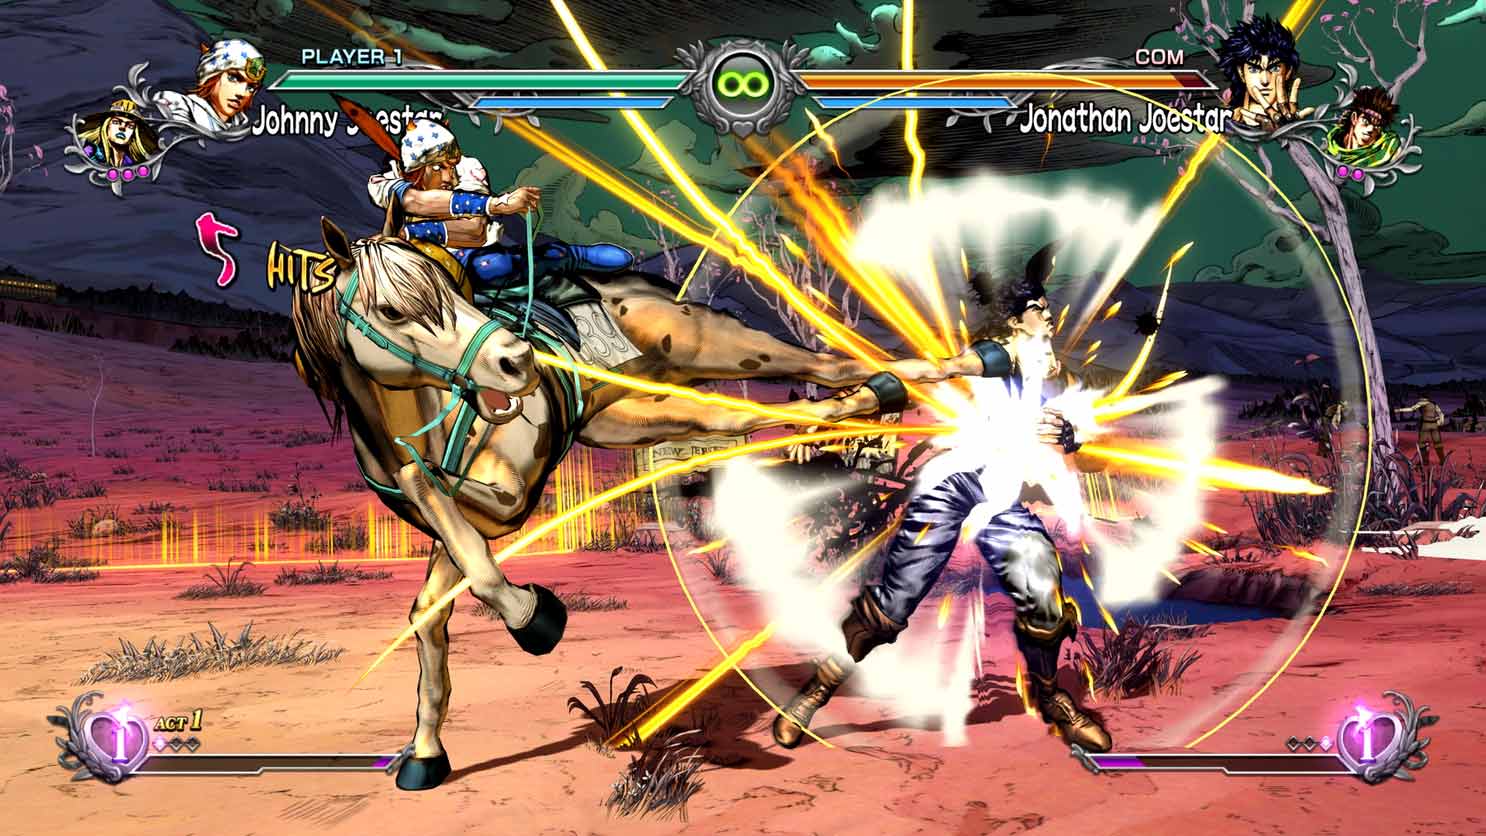 JoJo’s Bizarre Adventure: All Star Battle R (English), JoJo’s Bizarre Adventure All Star Battle R, PlayStation 4, PS4, PlayStation 4, Switch, Nintendo Switch, PS5, PlayStation 5, release date, trailer, screenshots, pre-order now, Asia, English Release, Asia English, Bandai Namco